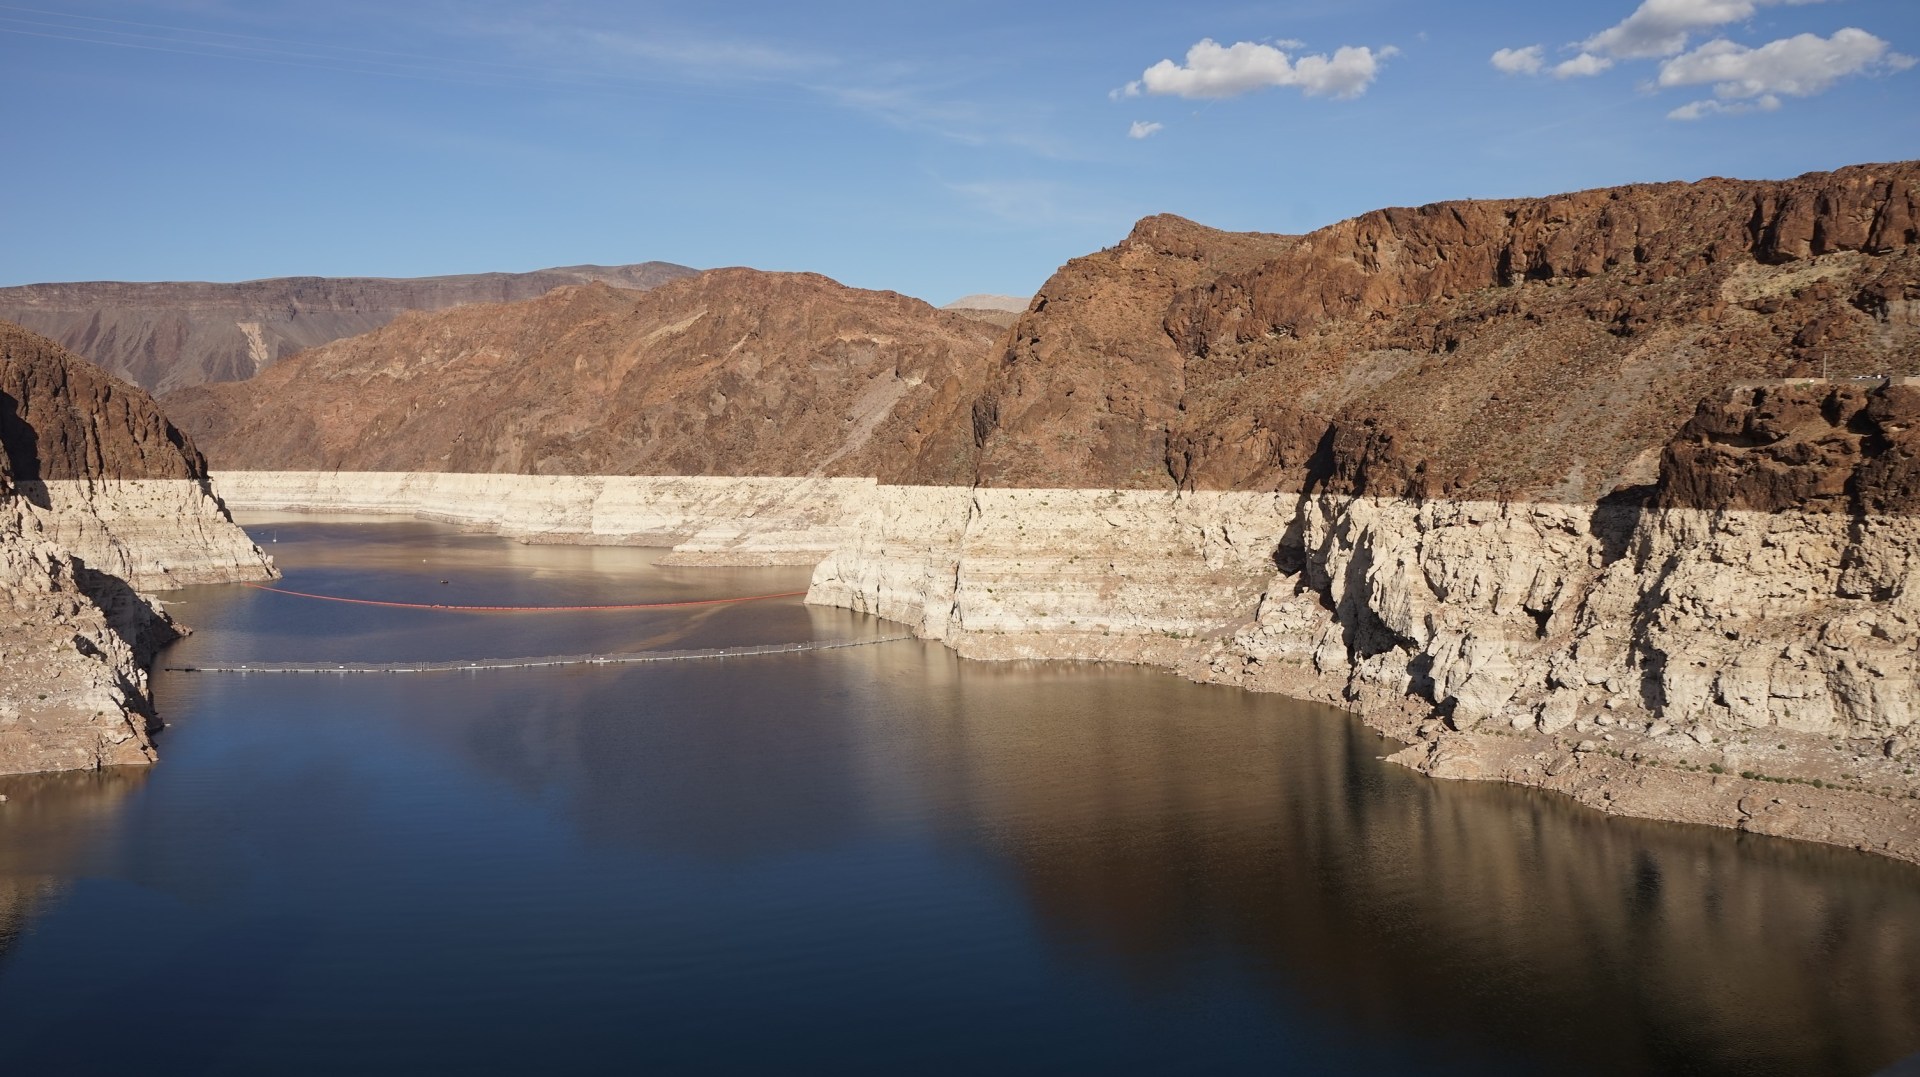 An archaic treaty that determines how much water from the Colorado River is allocated to states in America's Southwest is no longer viable.